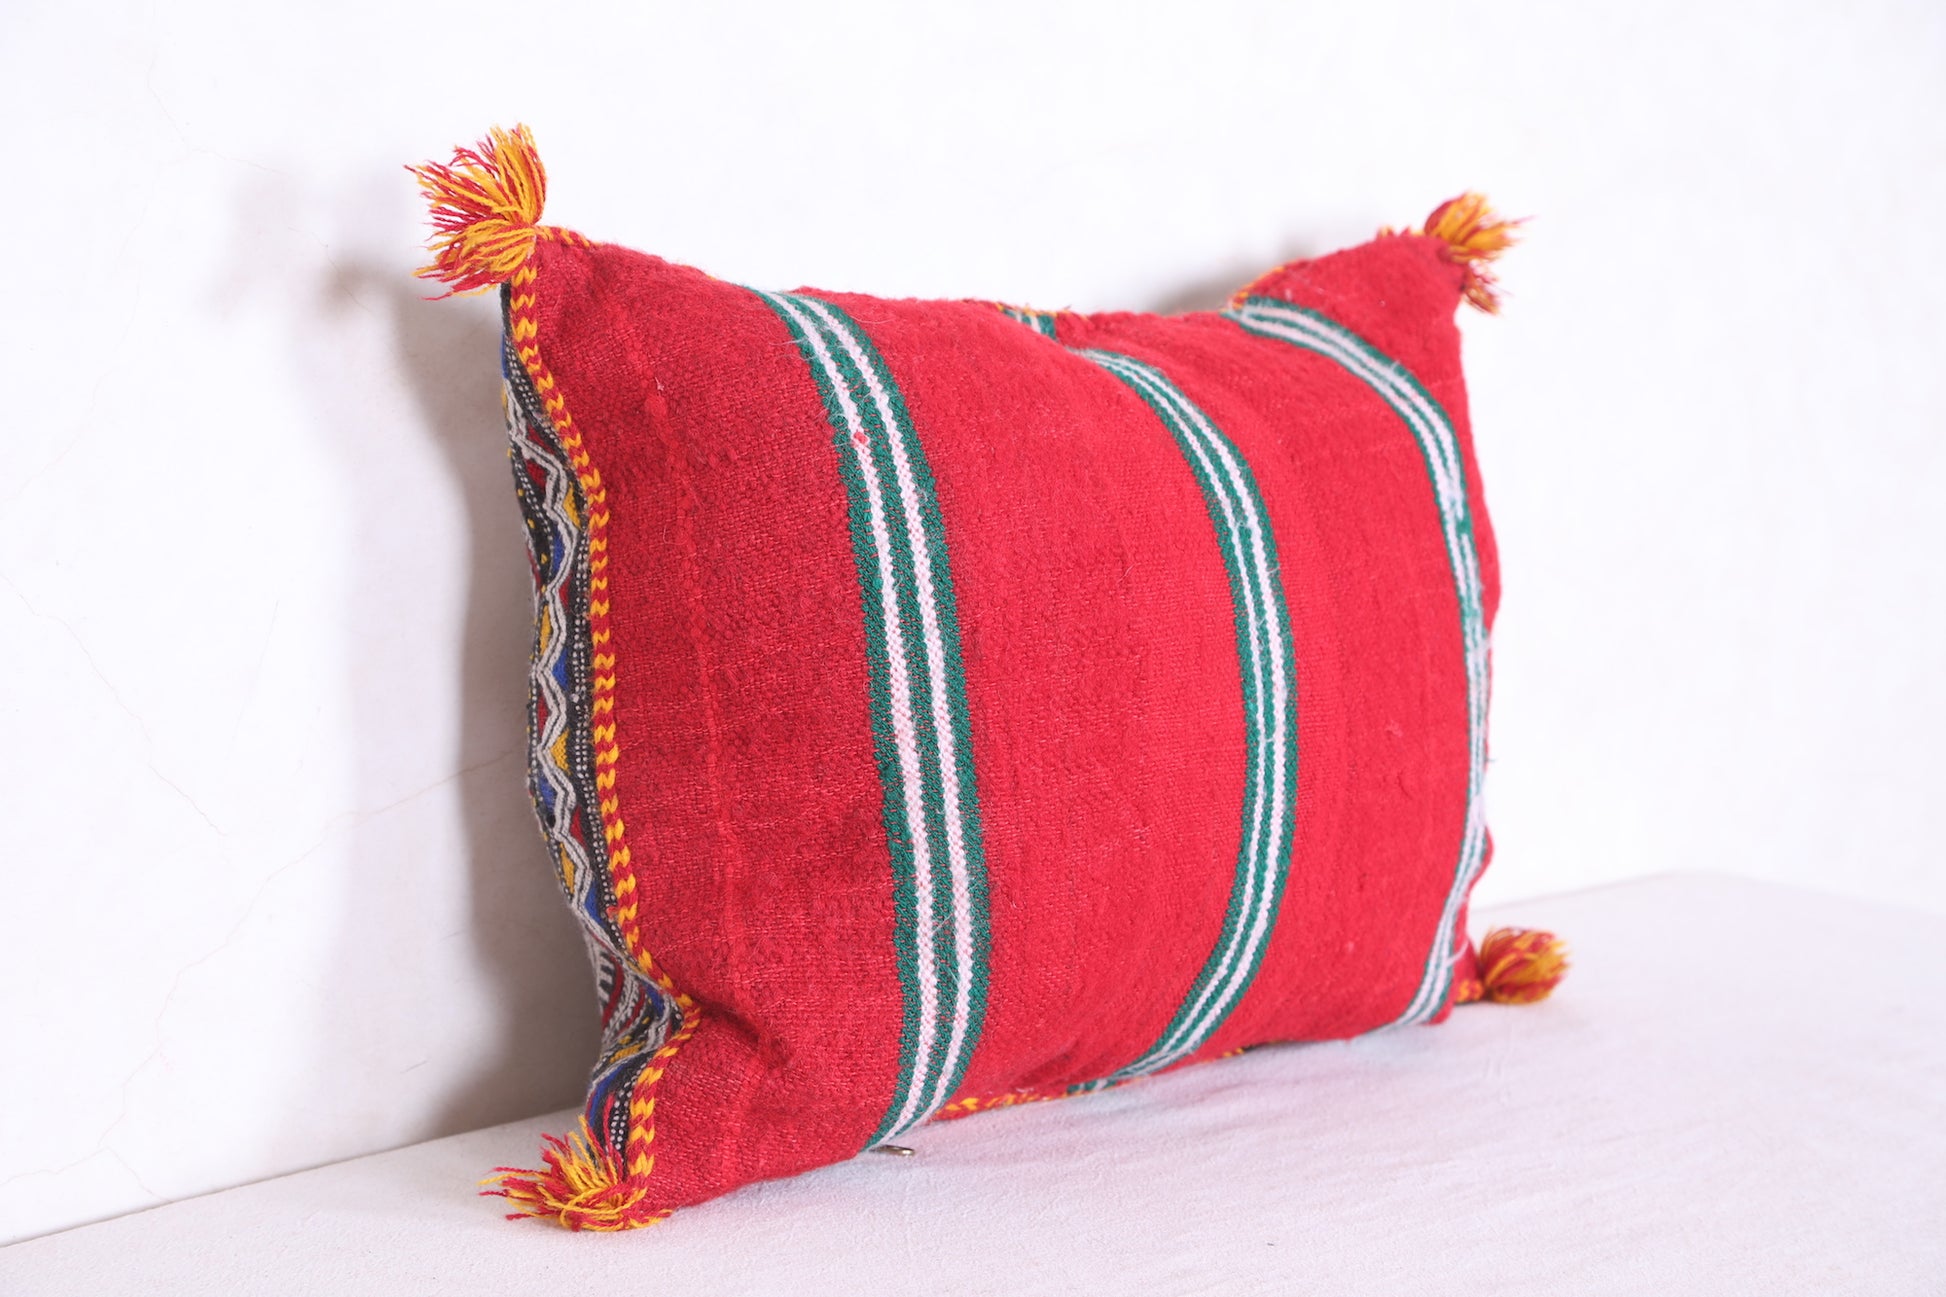 Moroccan handmade kilim pillow 15.3 INCHES X 20.4 INCHES